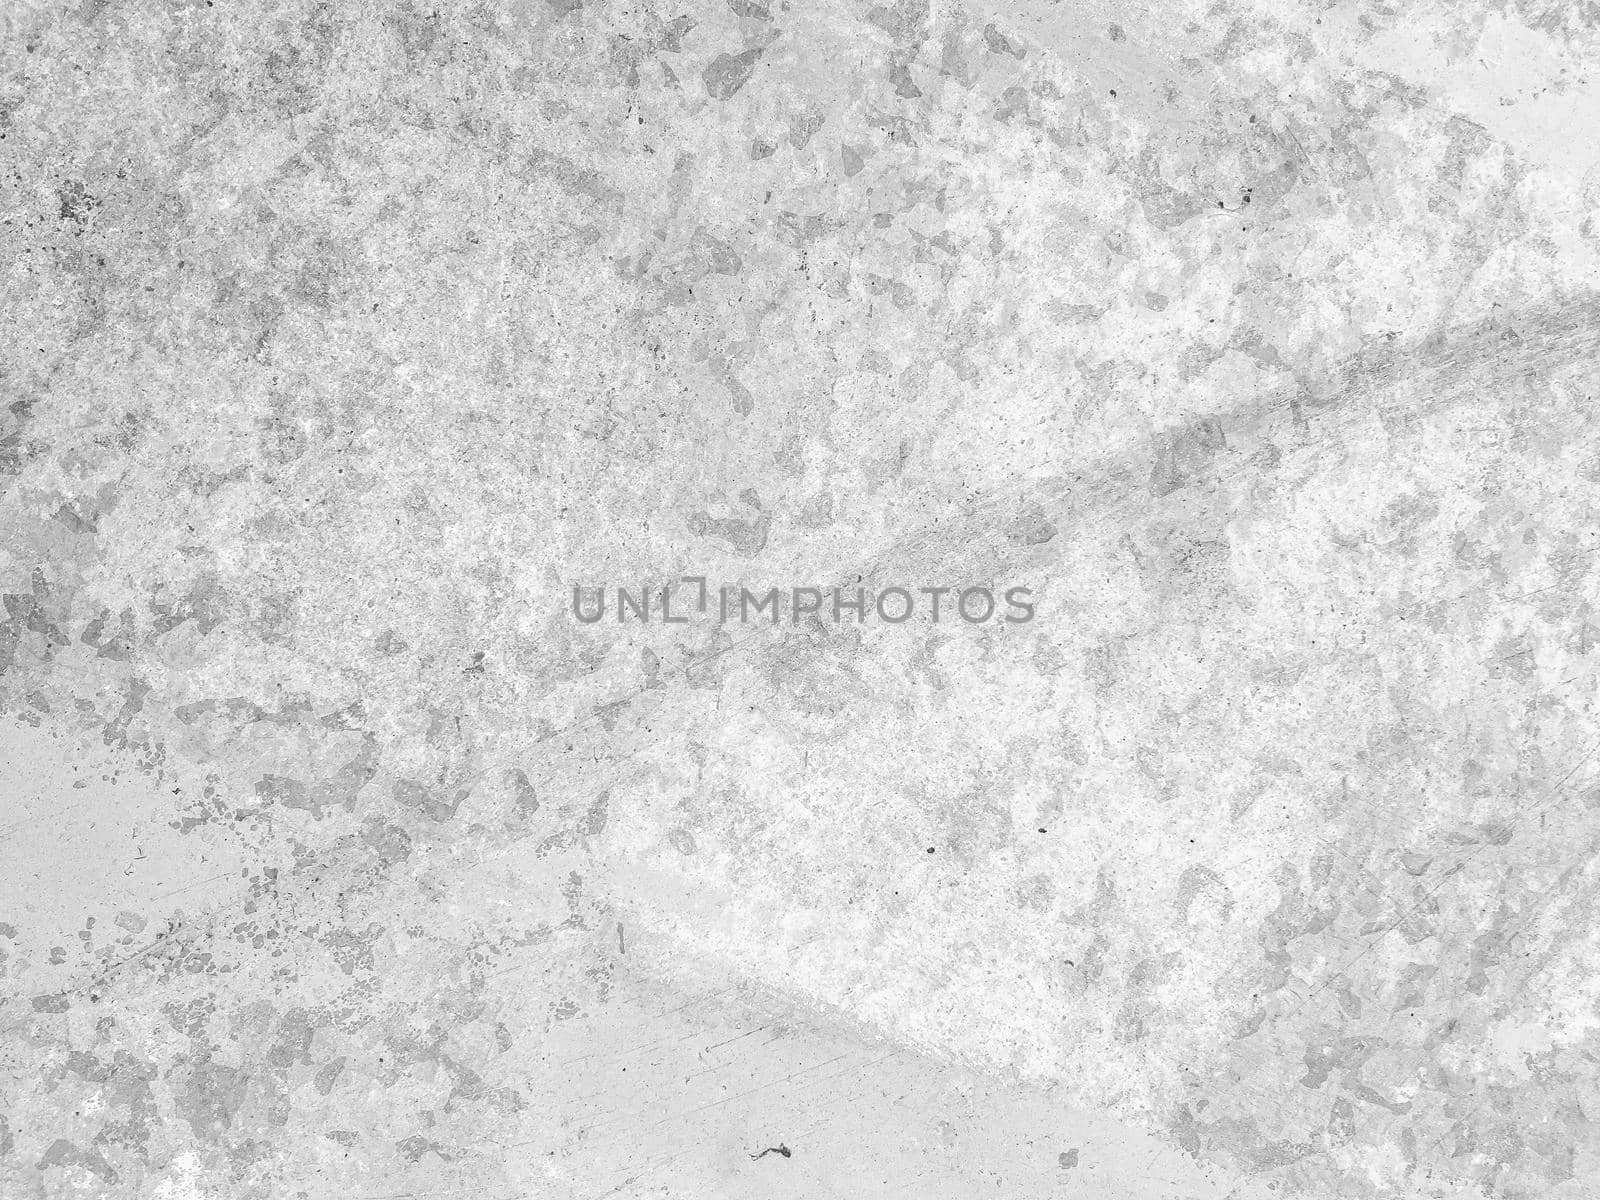 Distressed grunge background. Aged dust wallpaper. Weathered stains wall. Grunge Dirty metal surface. Retro old paper. Ancient cracked pattern. Gray grunge texture.